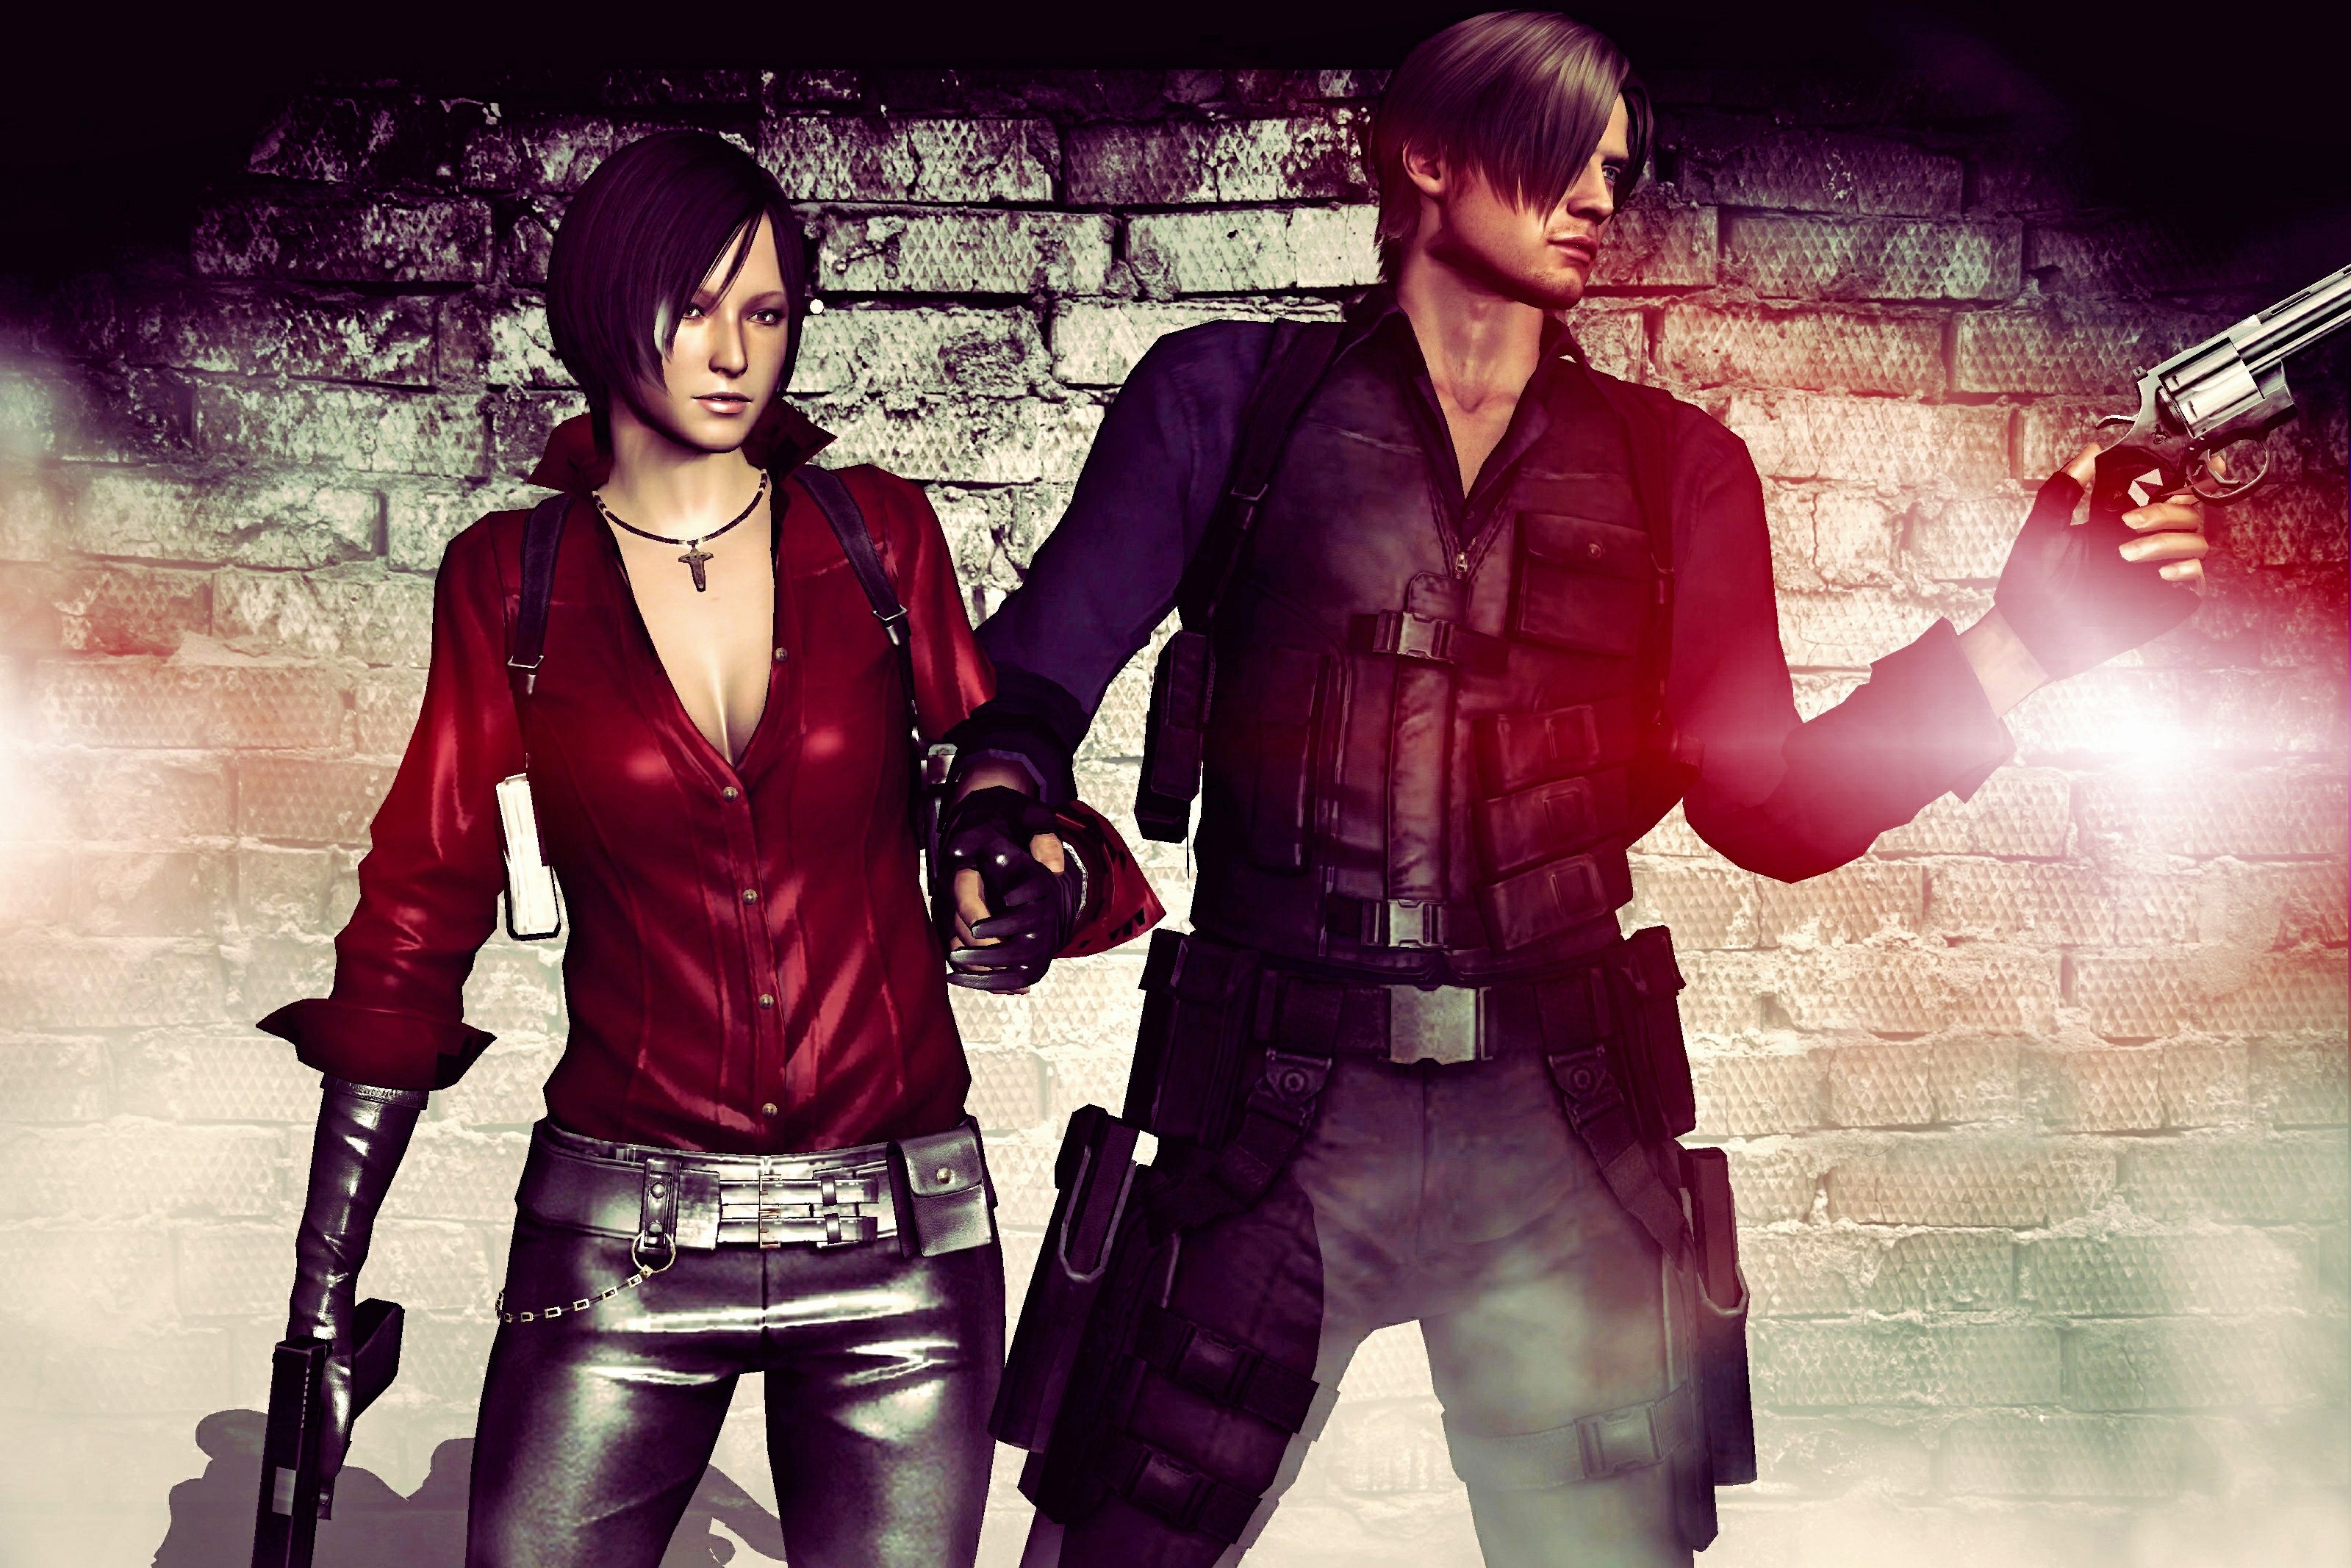 ada wong and leon kennedy relationship